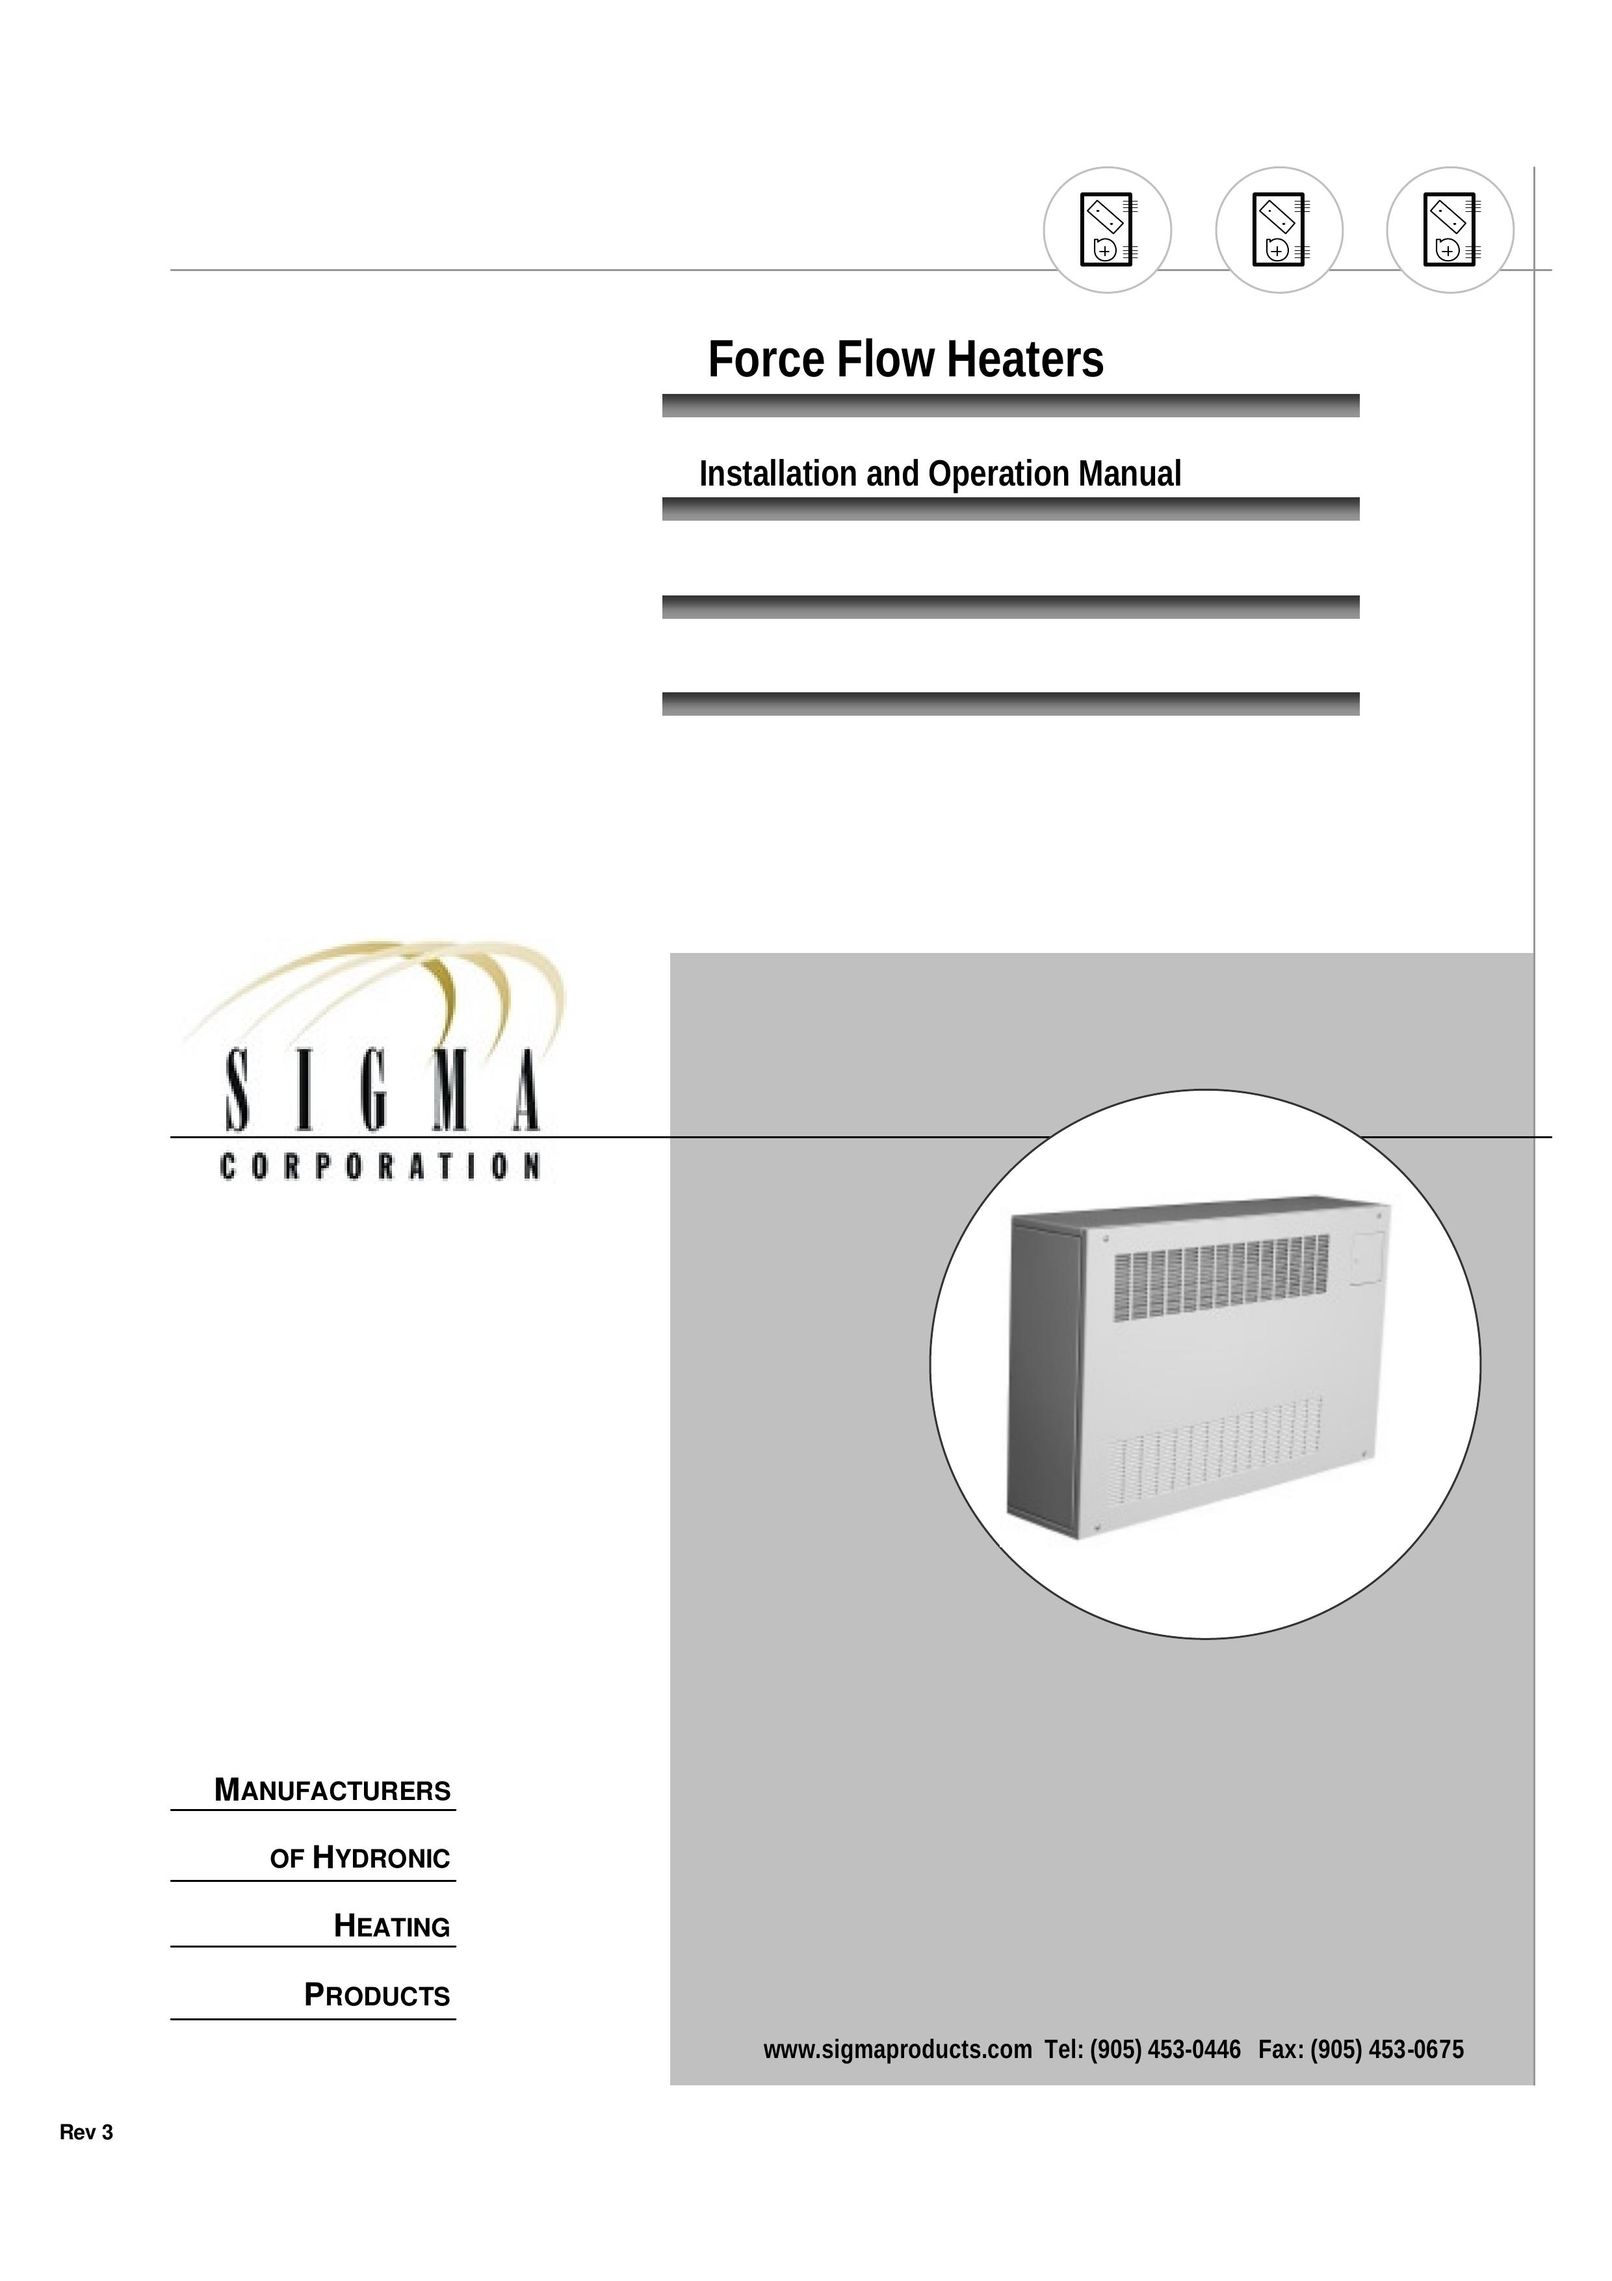 Sigma Force Flow Heaters Water Heater User Manual